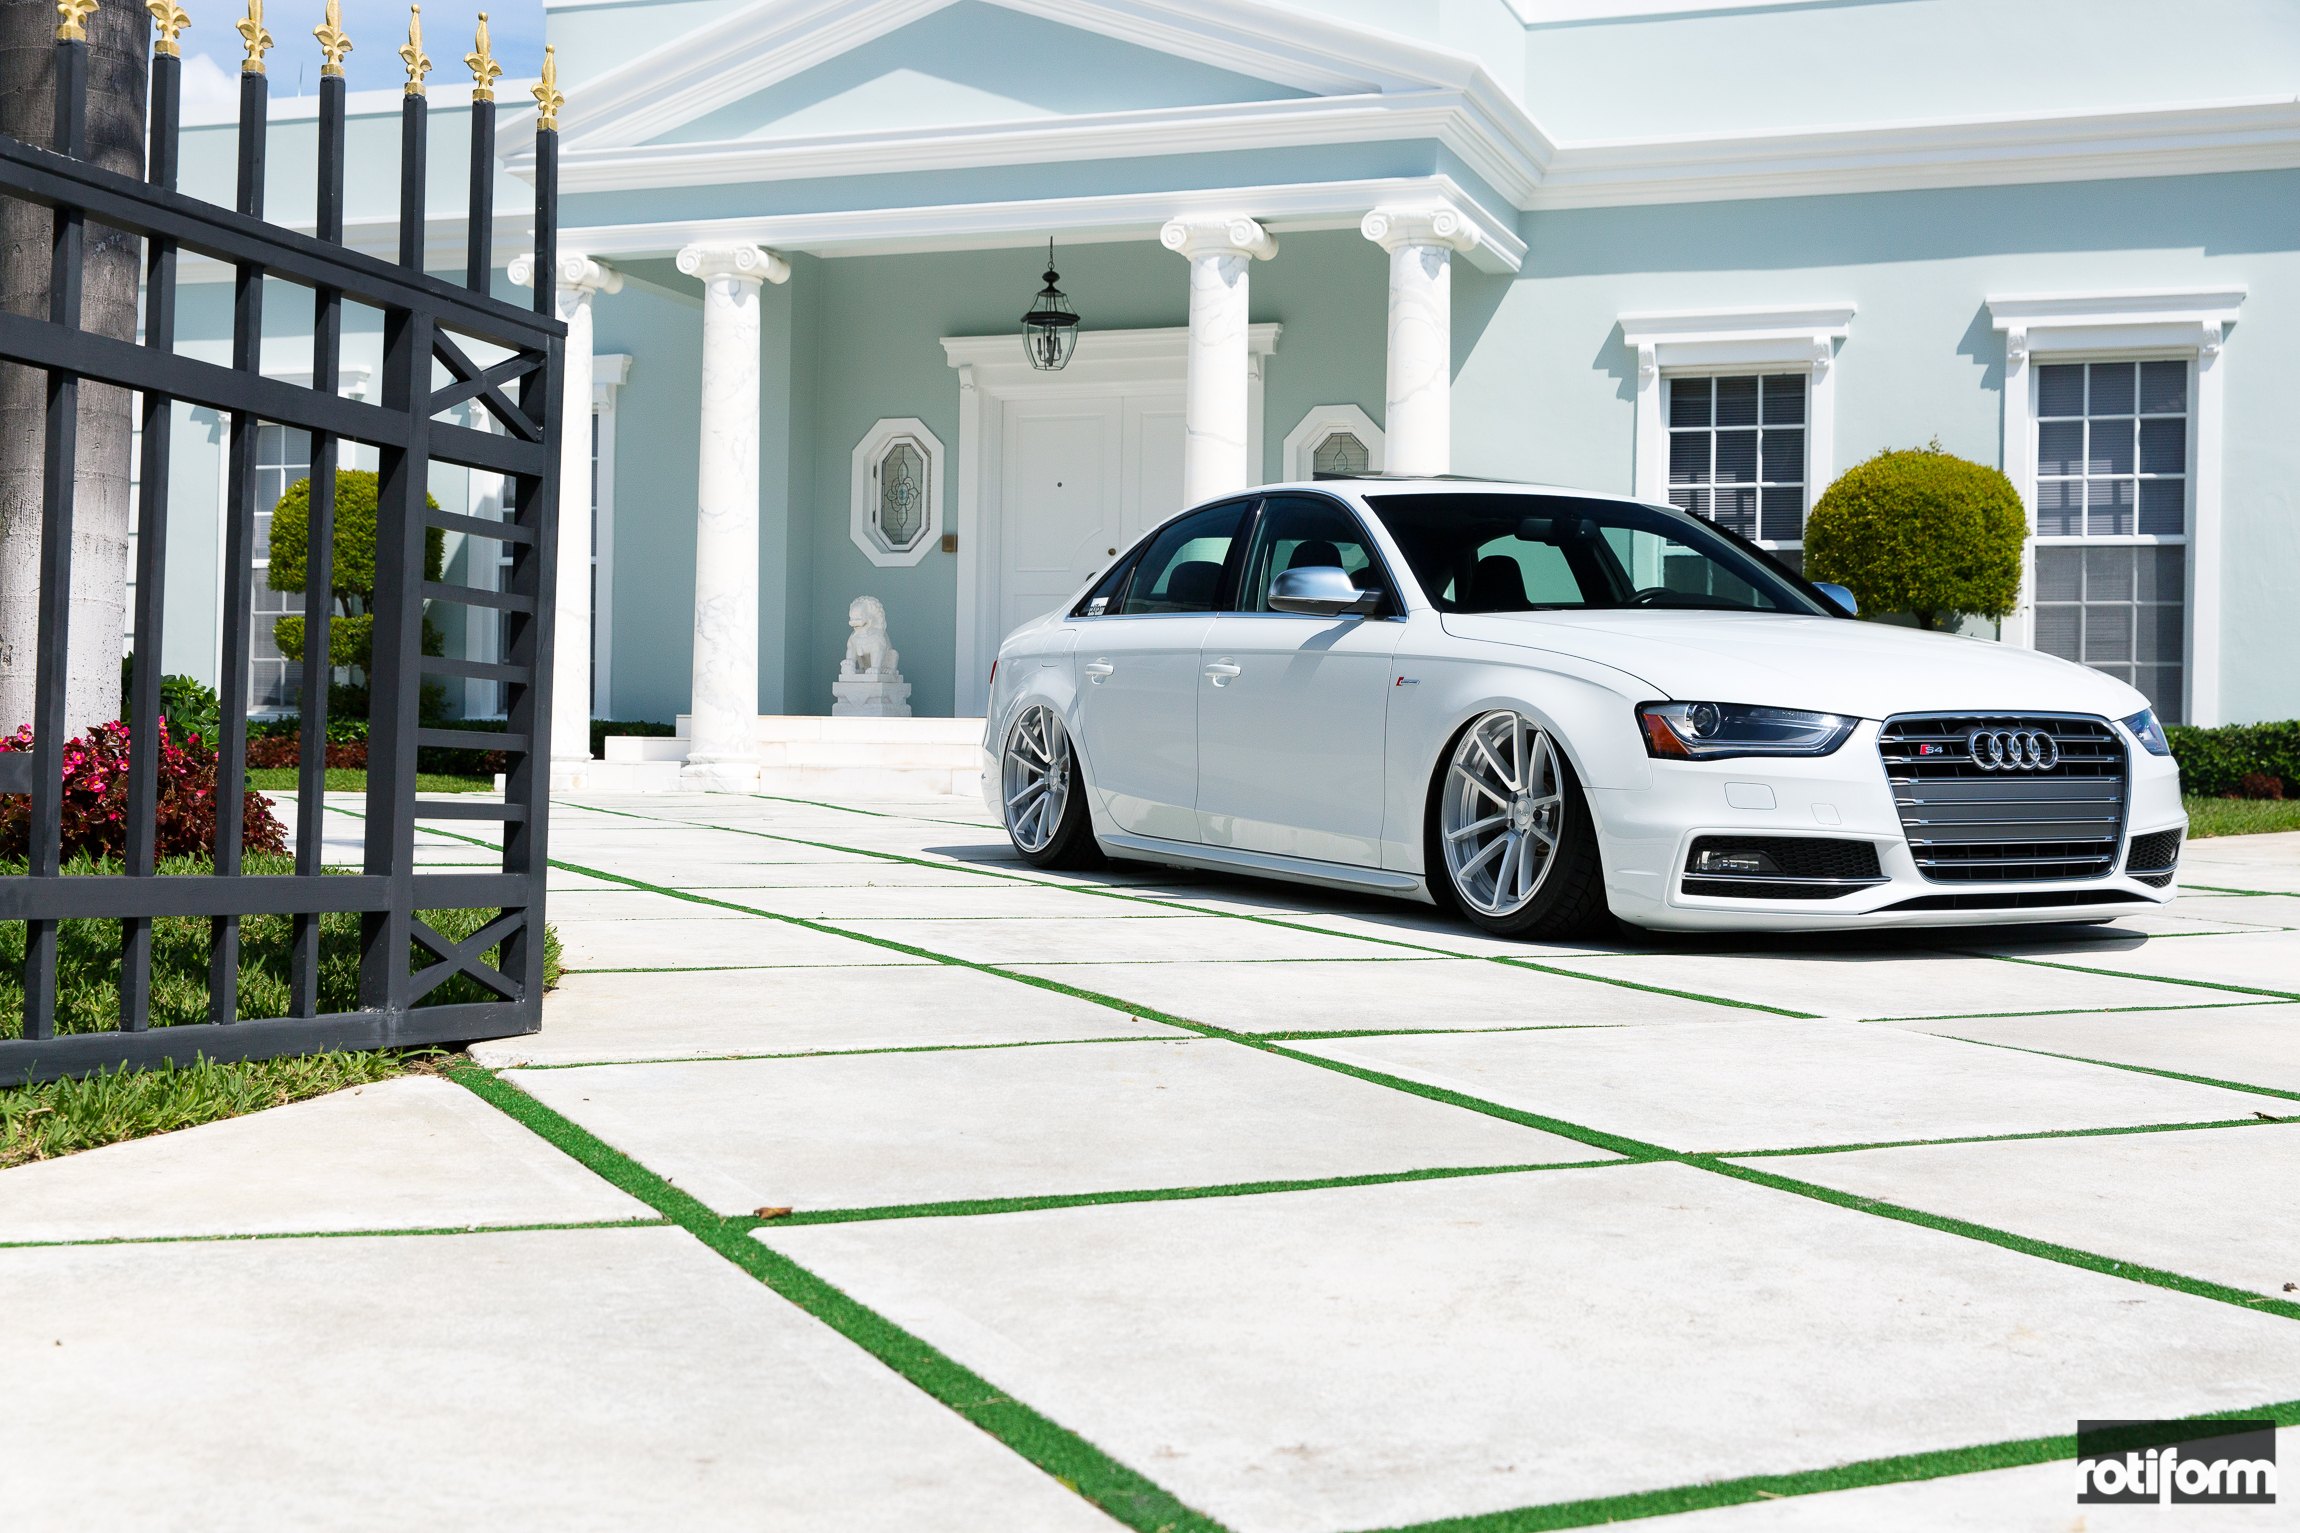 White Stanced Audi S4 with Chrome Grille - Photo by Rotiform